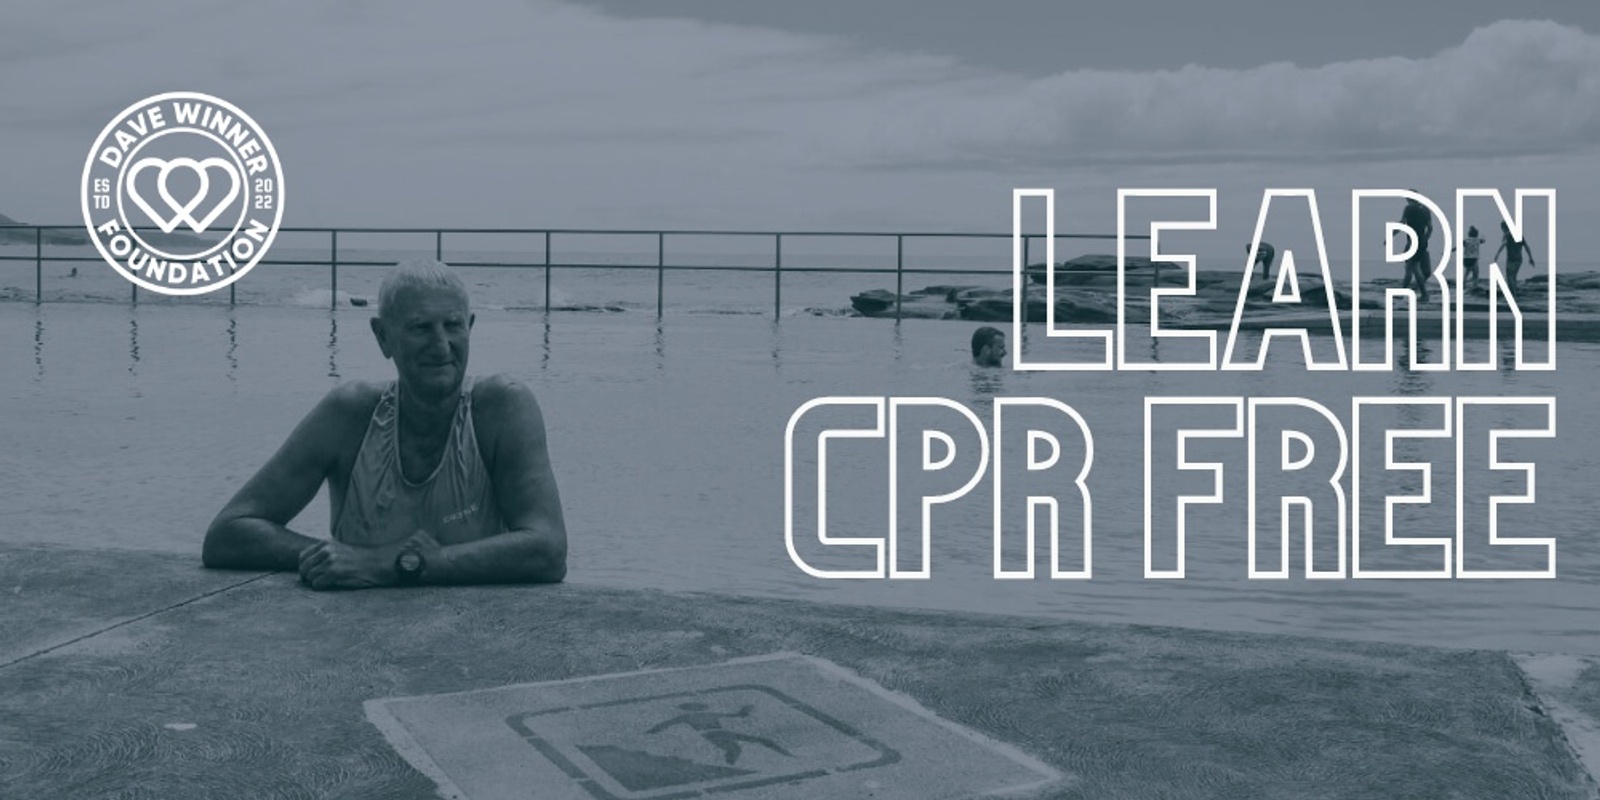 Banner image for Winner Foundation: Free CPR Training #18